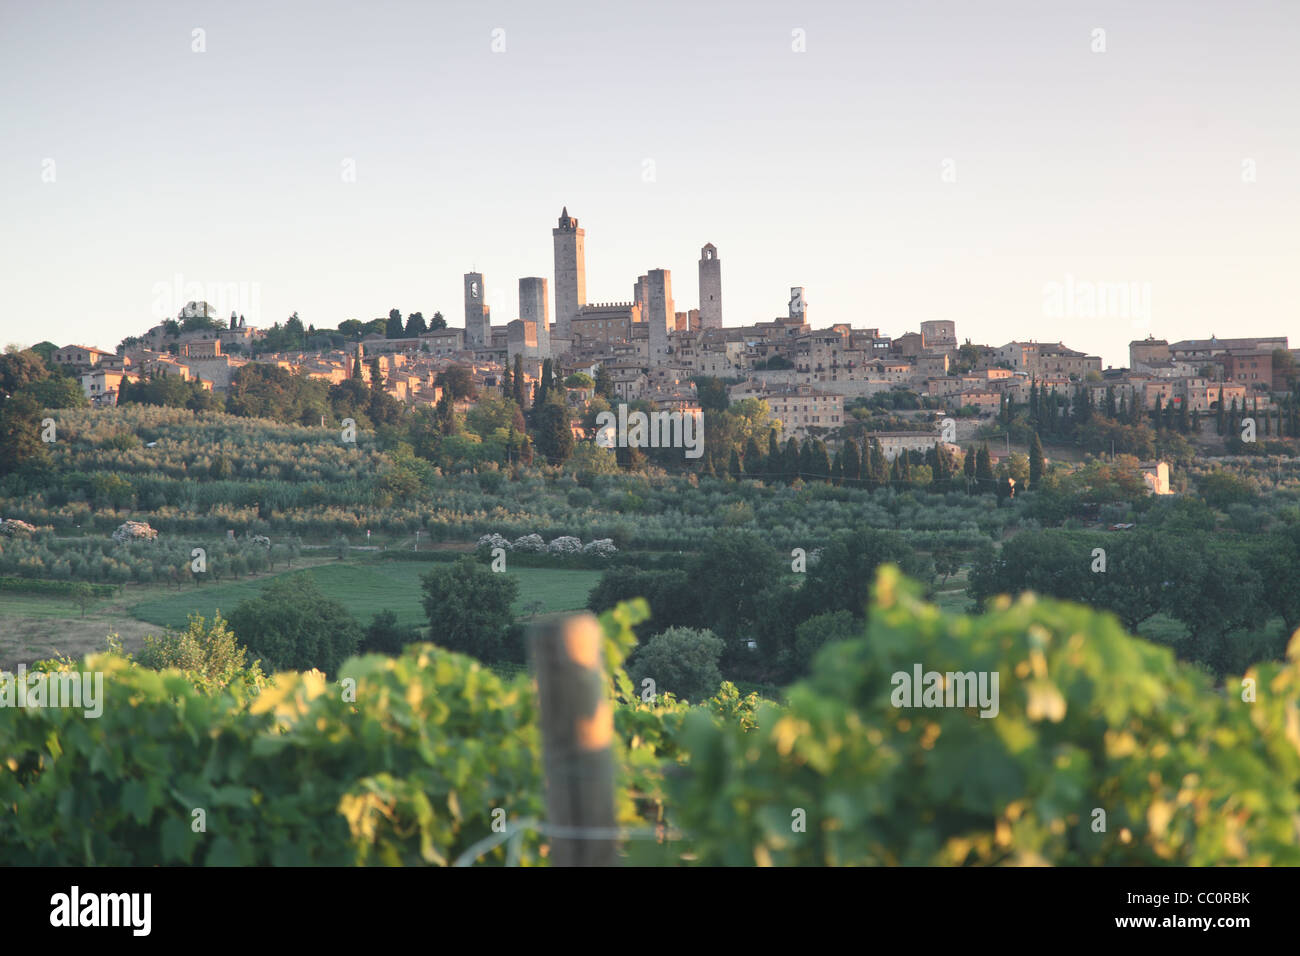 The hill town of San Gimignano with vines in foreground, Tuscany, Italy. Stock Photo